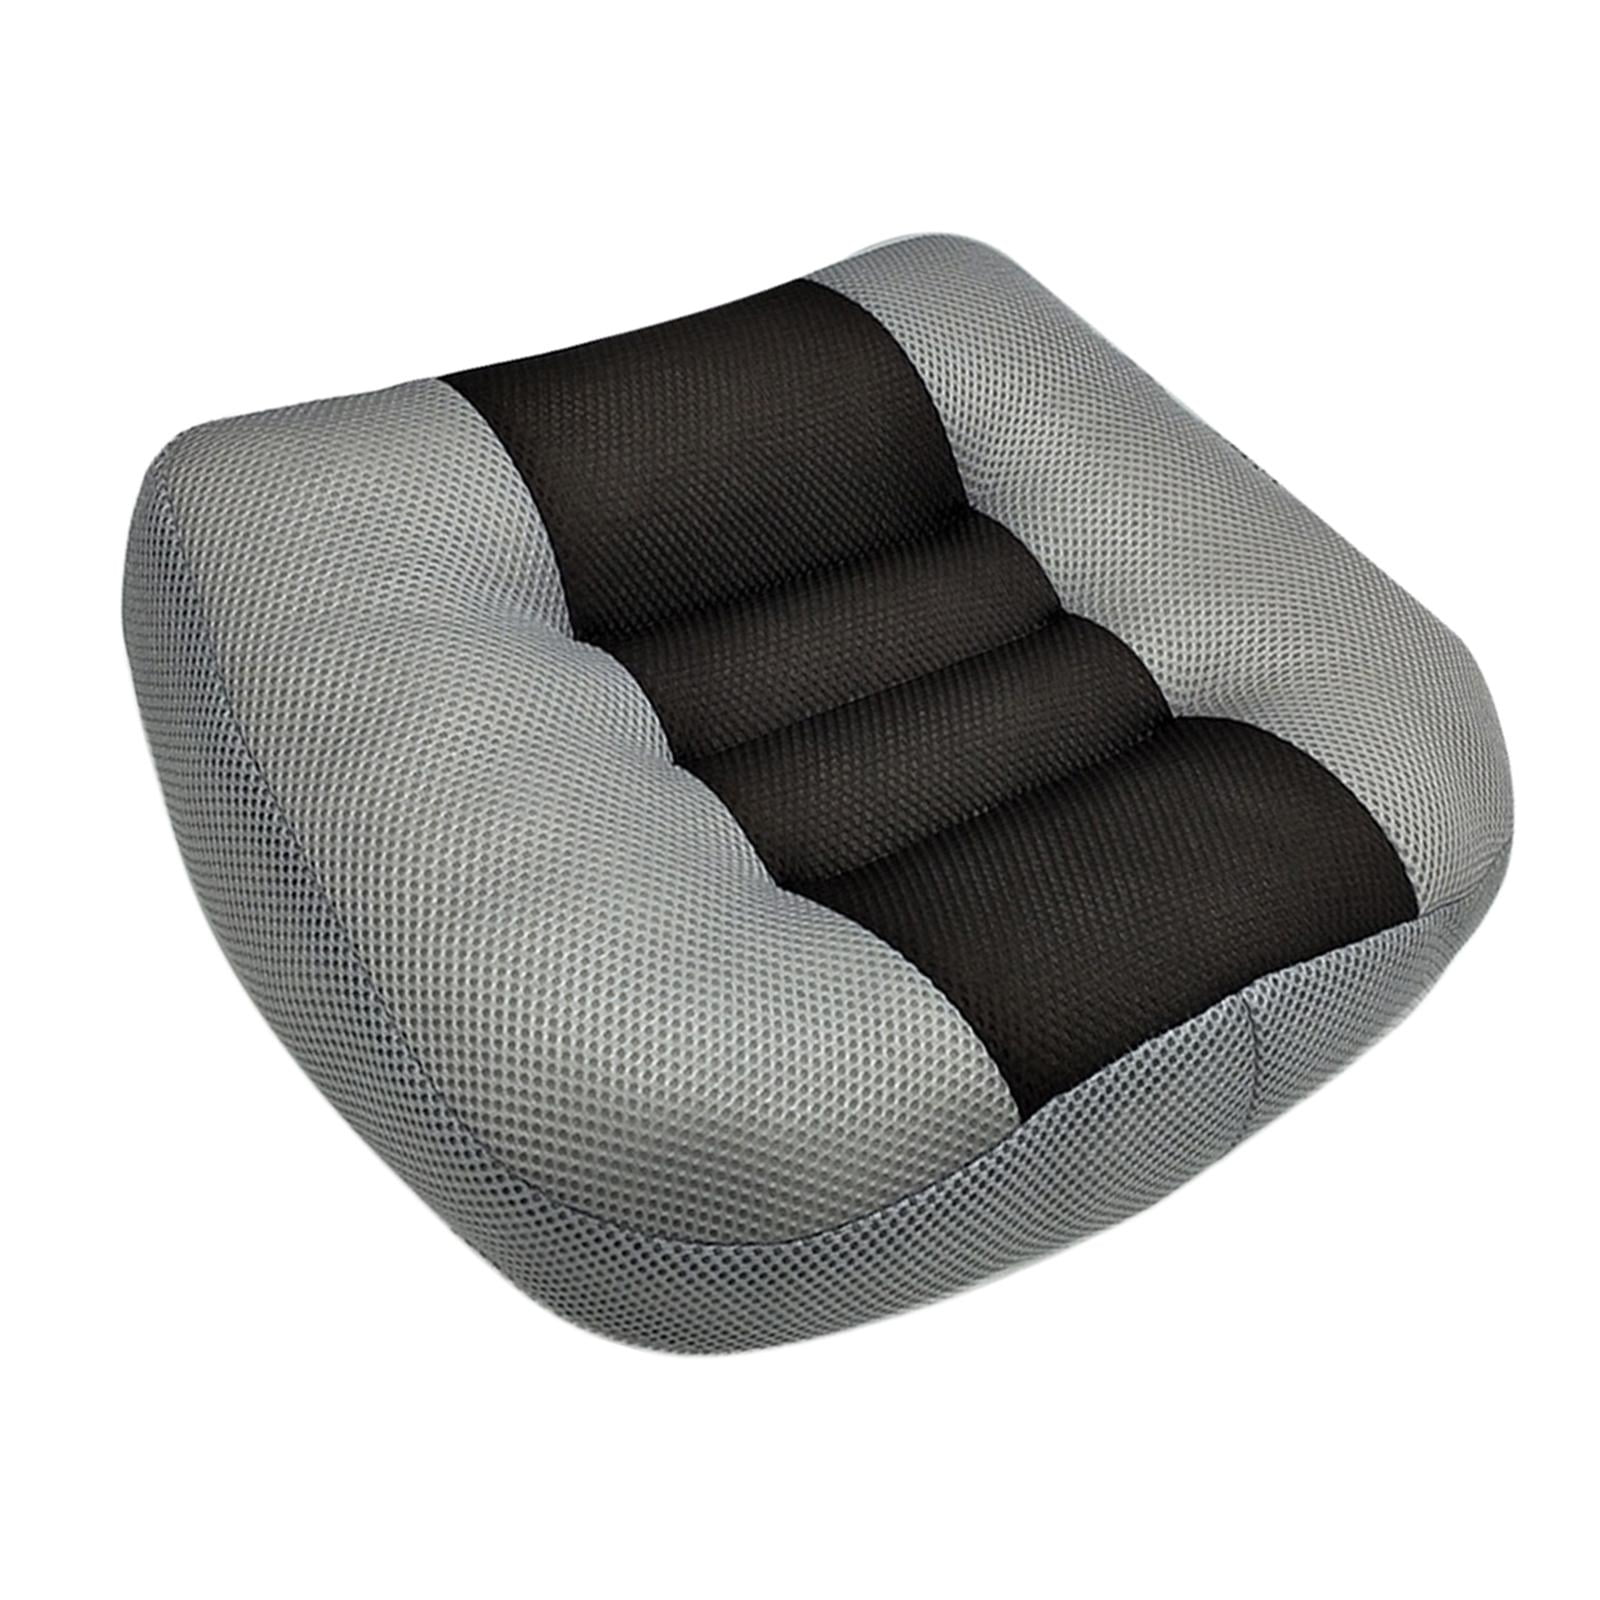 Adult Booster Seat for Car, Cushion Heightening Height Boost Mat,  Breathable Mesh Portable Car Seat Pad Angle Lift Seat for Car, Office,Home